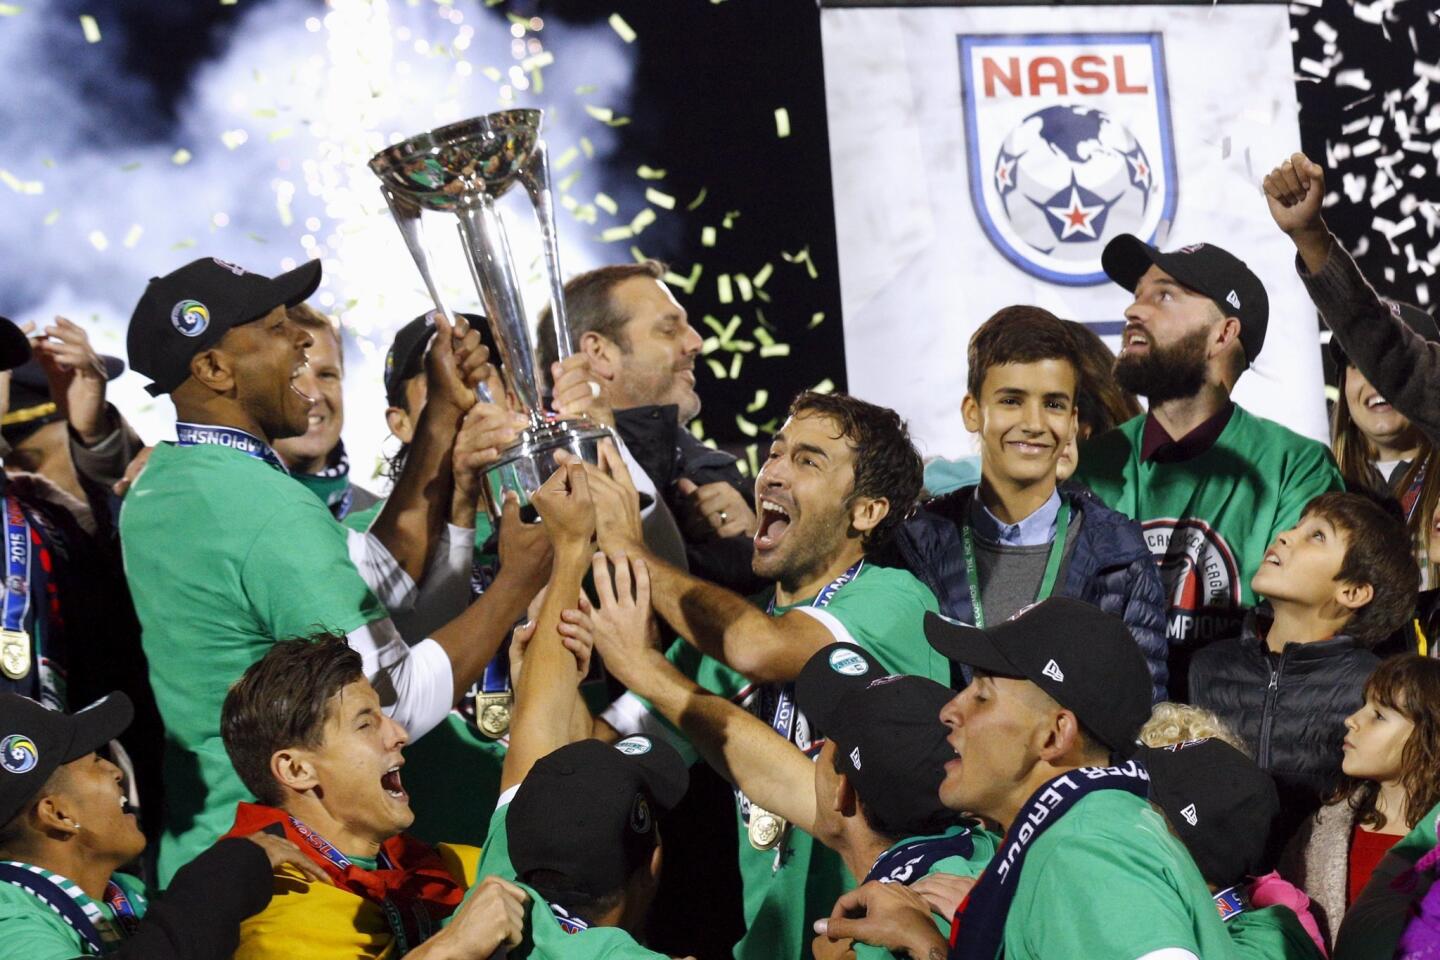 New York Cosmos player Raul Gonzalez (C) celebrates with teammate Marcos Senna (L) and other teammates following their team's win over the Ottawa Fury for the NASL Championship in Hempstead, New York, November 15, 2015. REUTERS/Brendan McDermid ** Usable by SD ONLY **